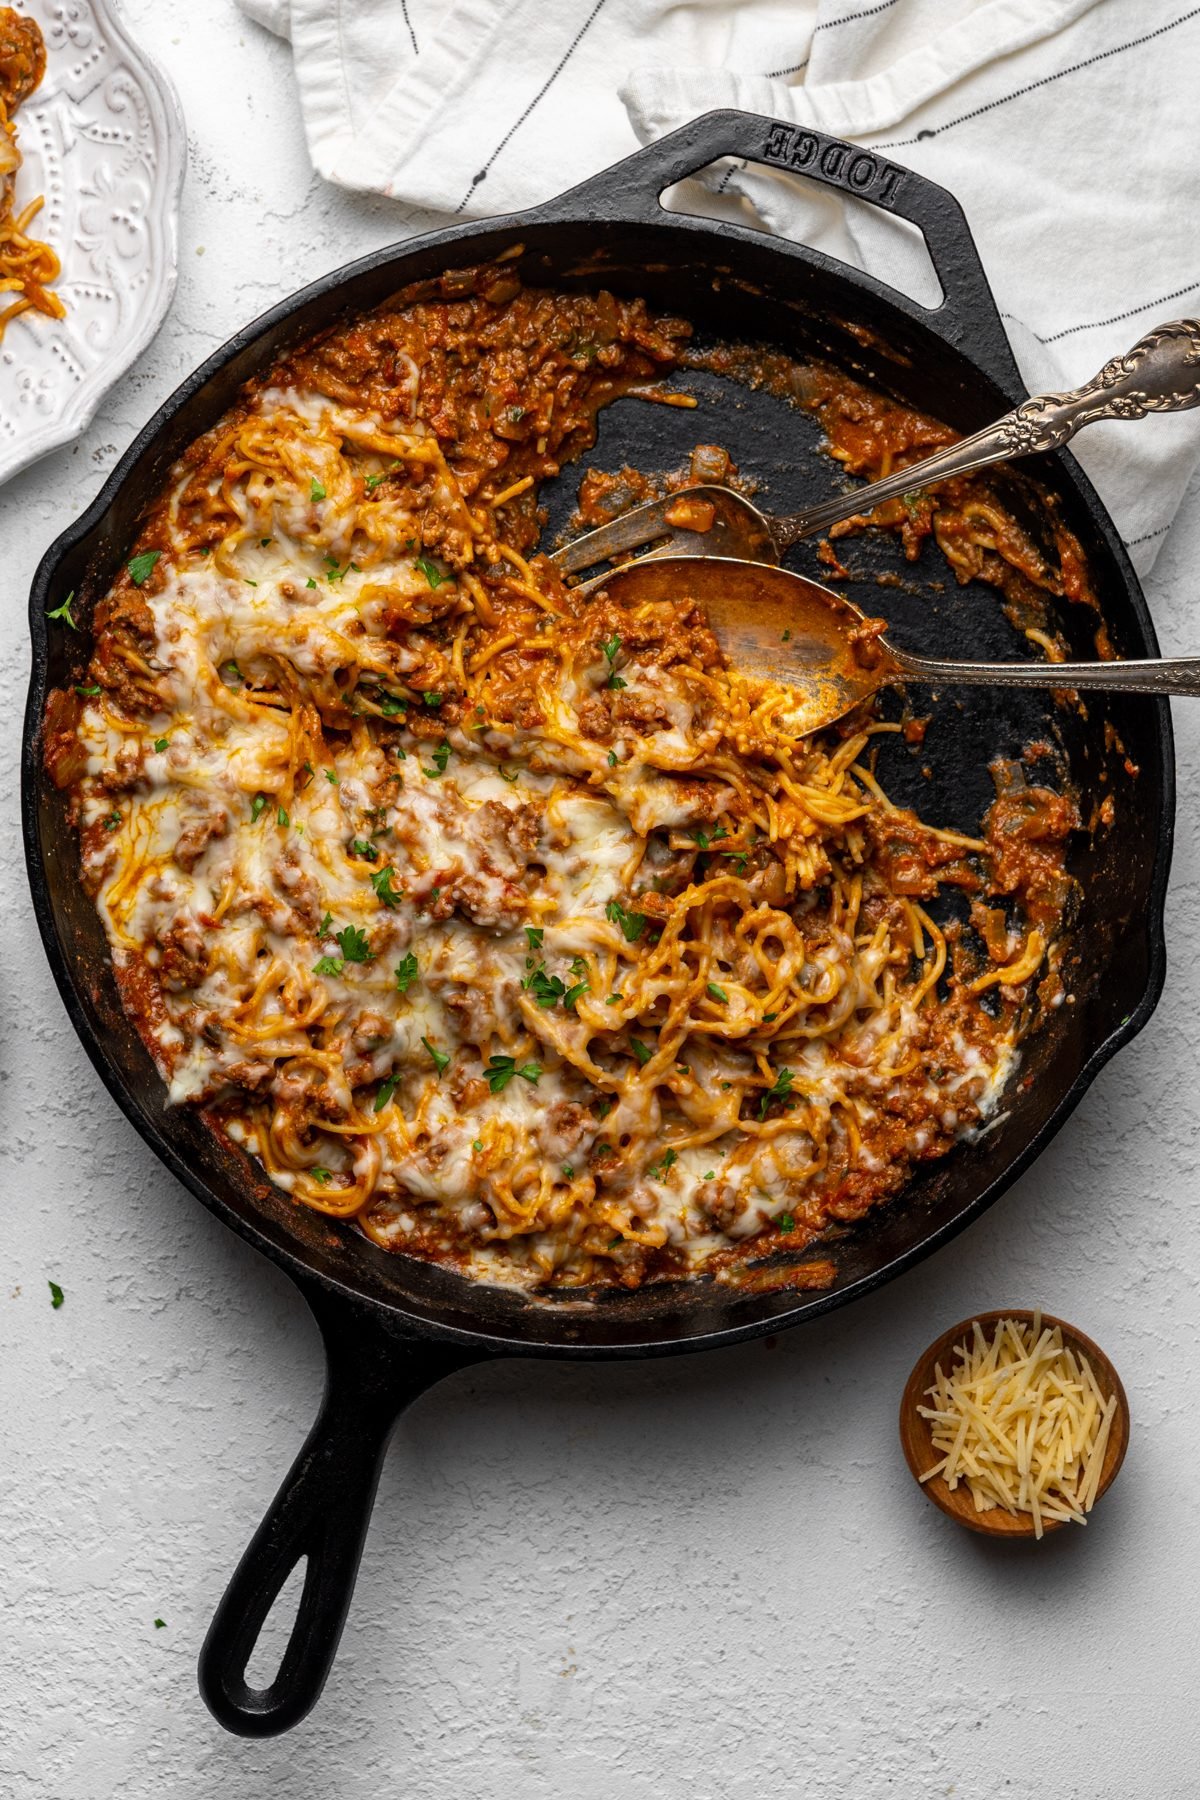 Serving utensils in a partially-served skillet of fried spaghetti.